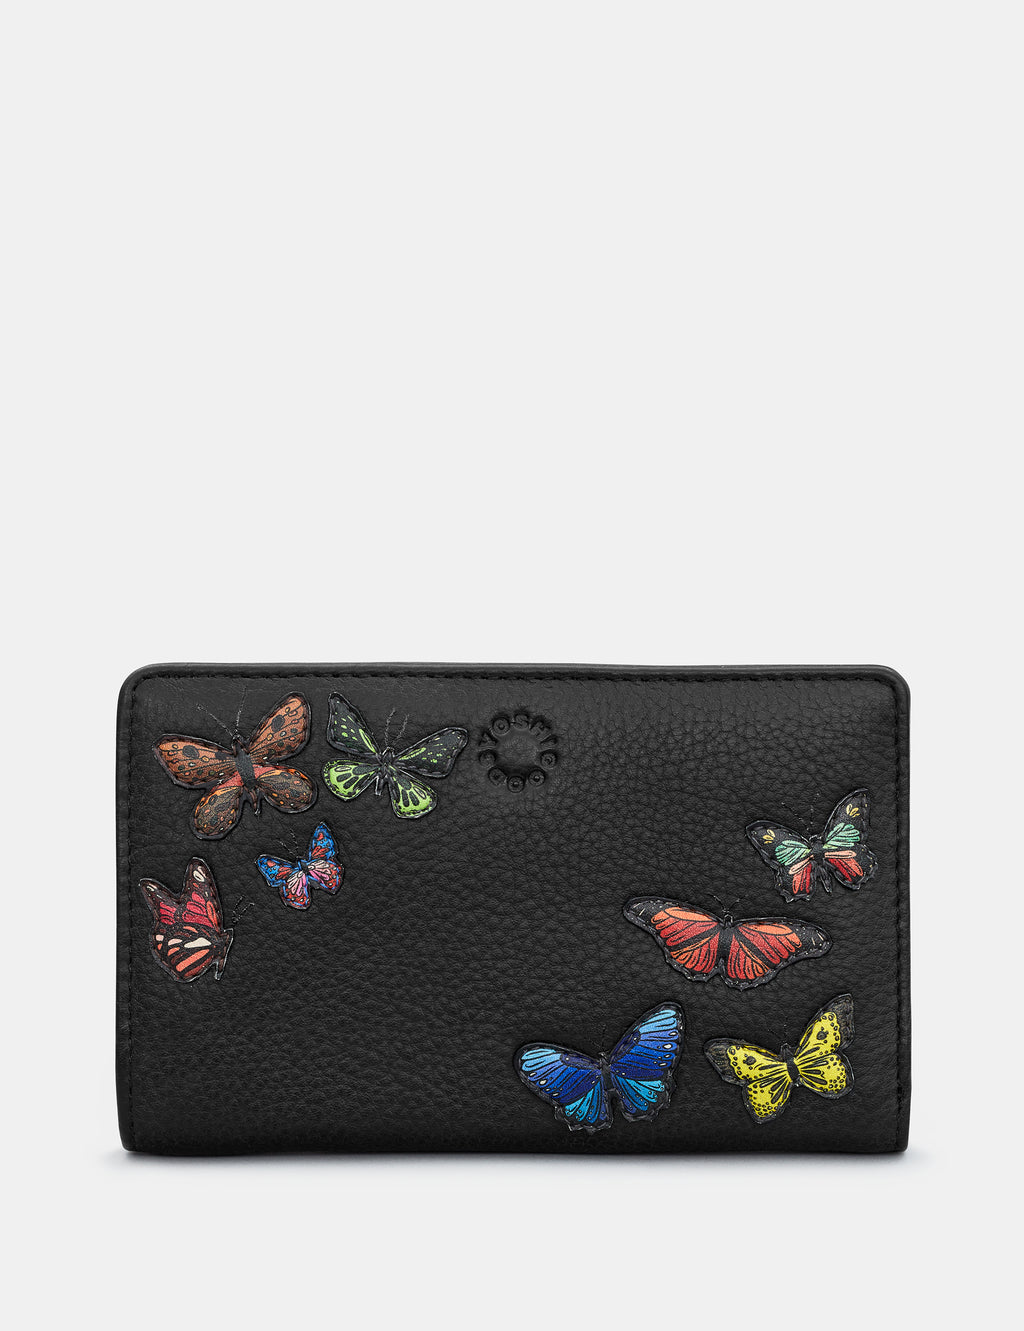 Amongst Butterflies Flap Over Zip Around Leather Purse